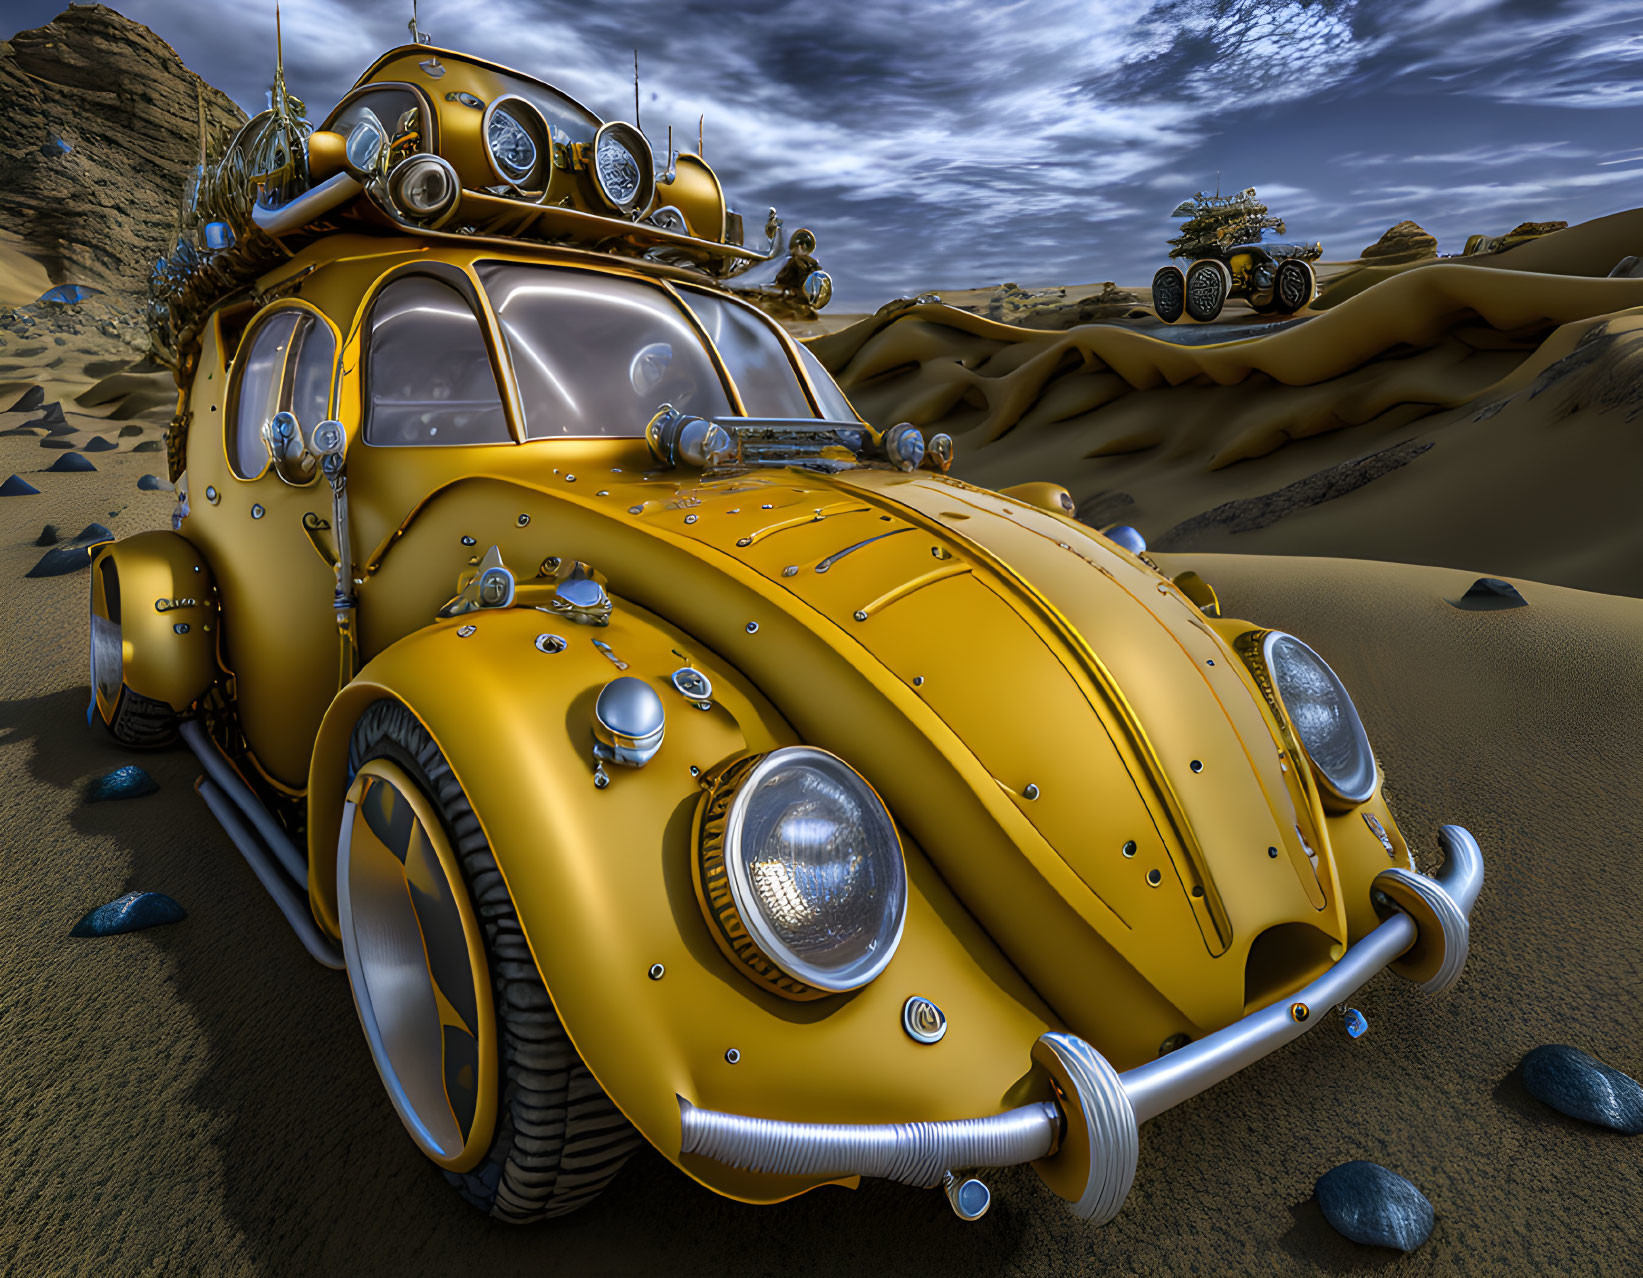 Detailed Yellow Beetle-Shaped Car with Futuristic Mods in Desert Setting